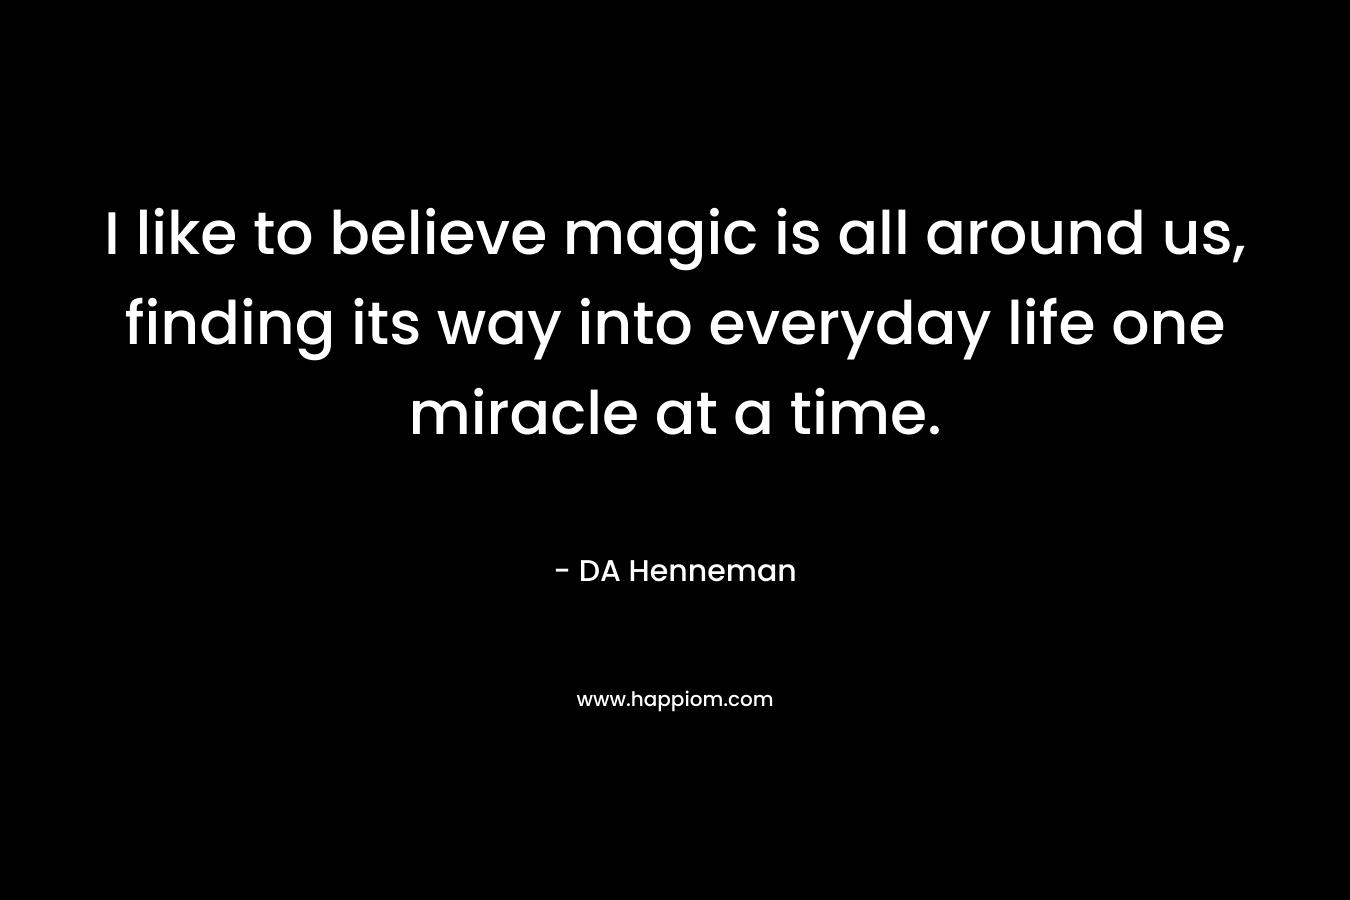 I like to believe magic is all around us, finding its way into everyday life one miracle at a time.